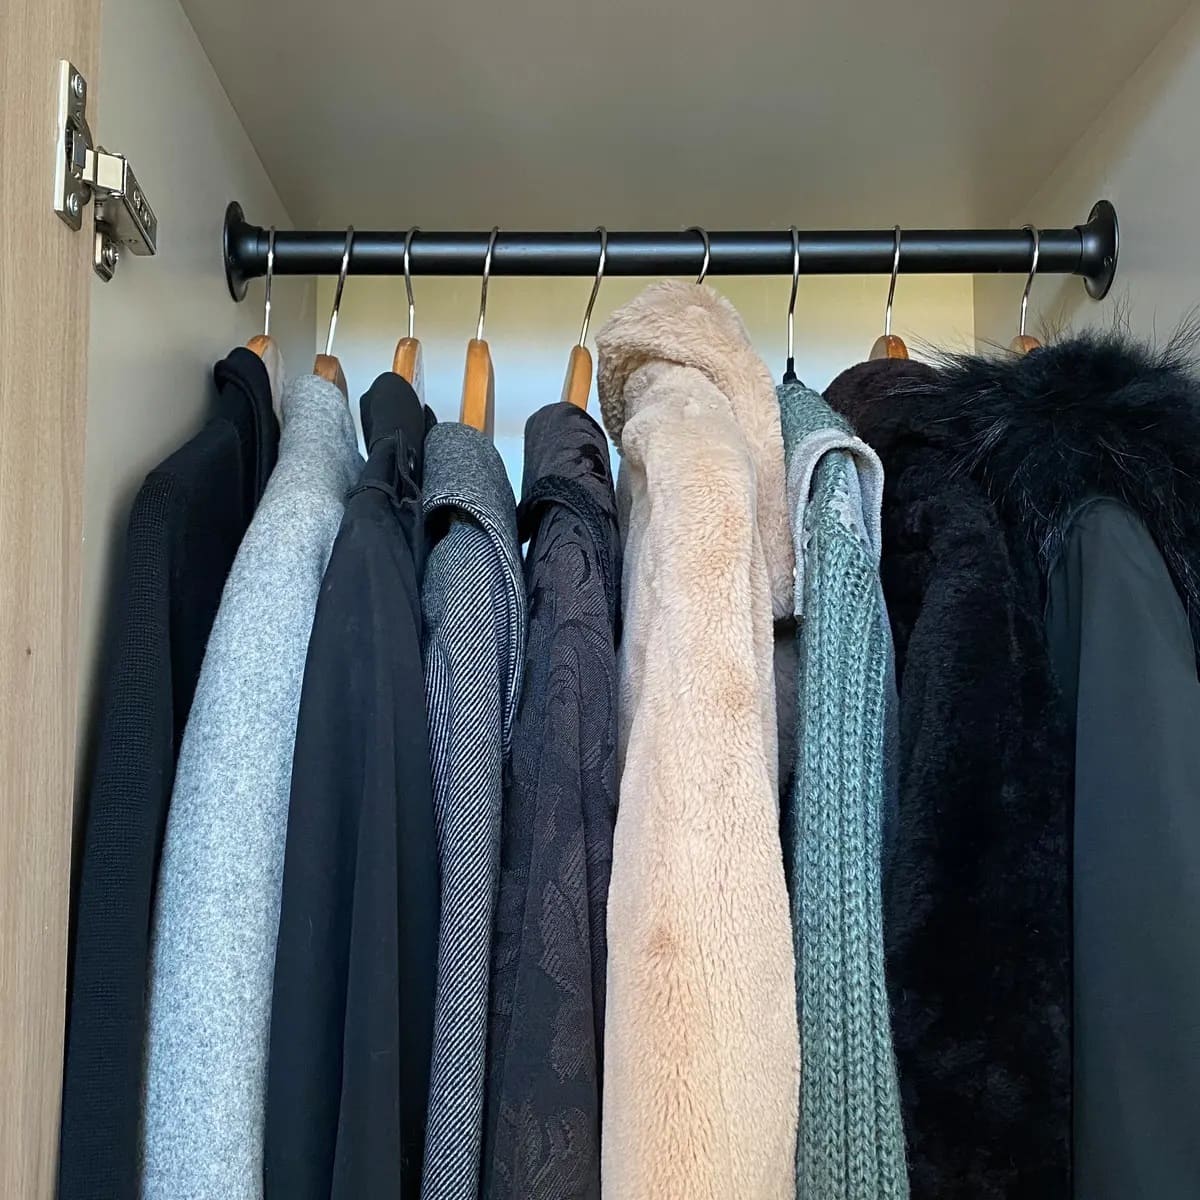 How To Store Coats